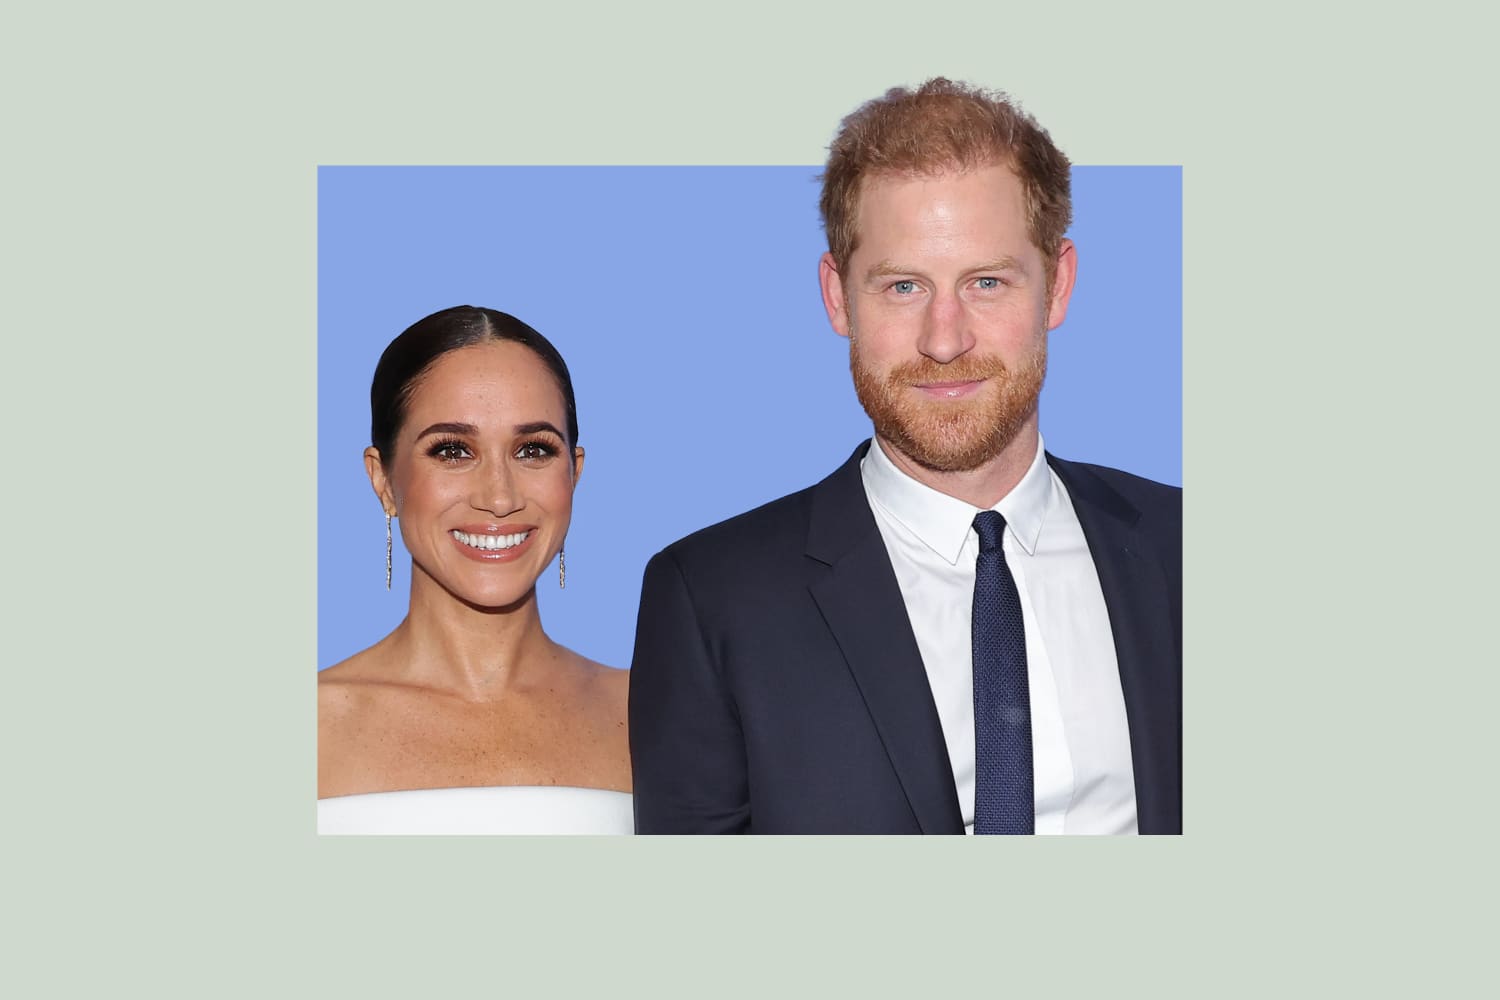 Where does Meghan get her style tips? The answer may surprise you